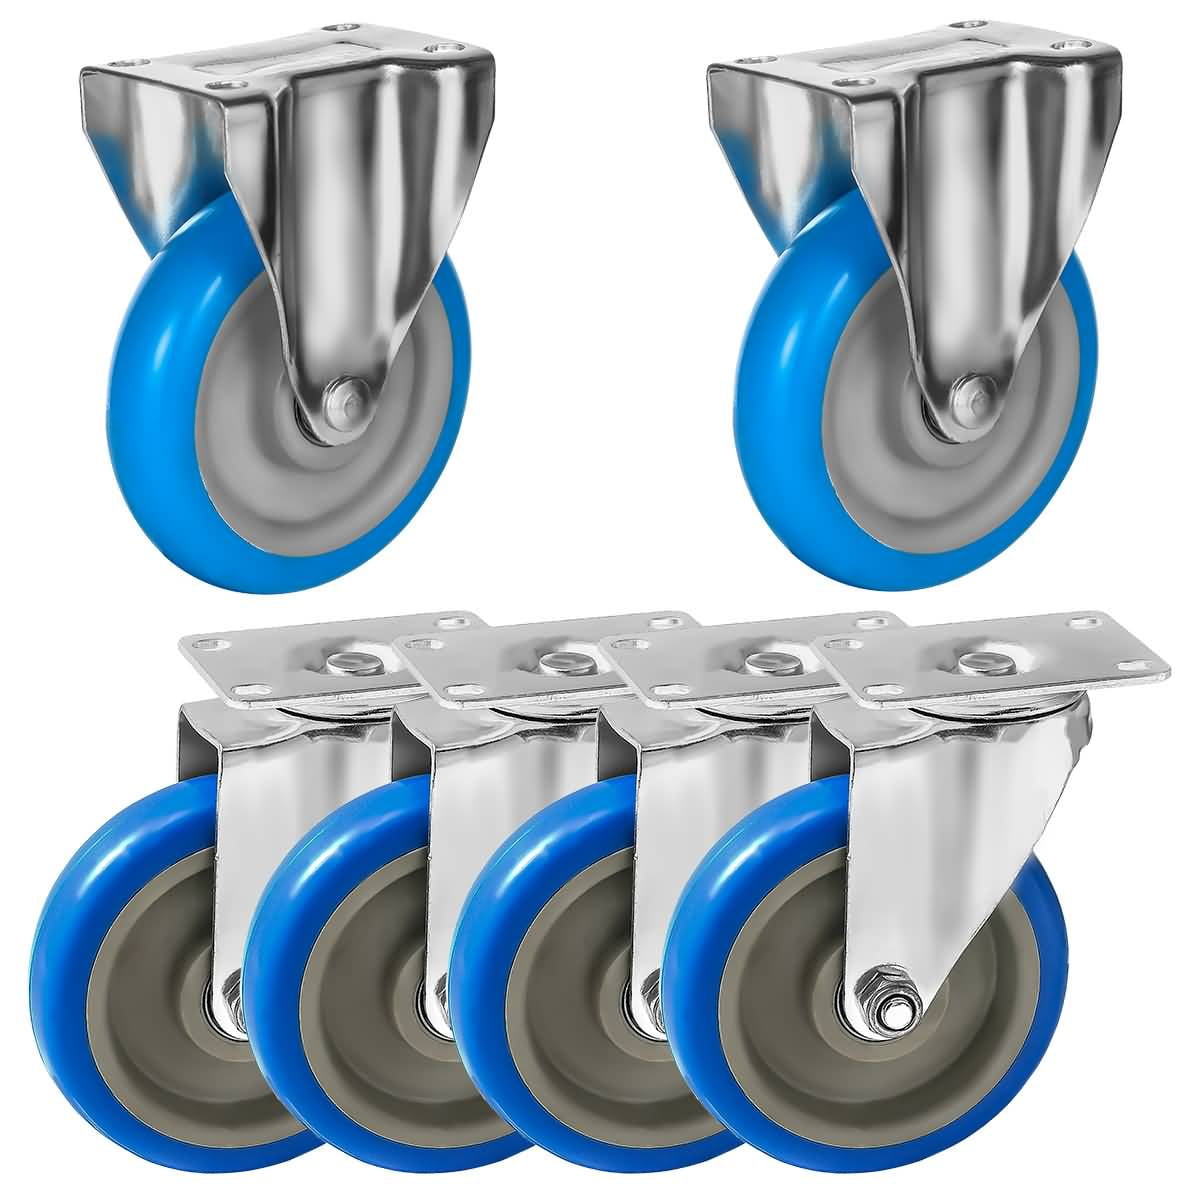 4 Pack 350lbs Plastic Blue Swivel Casters Wheels Cart Office Home 5" No Brakes 